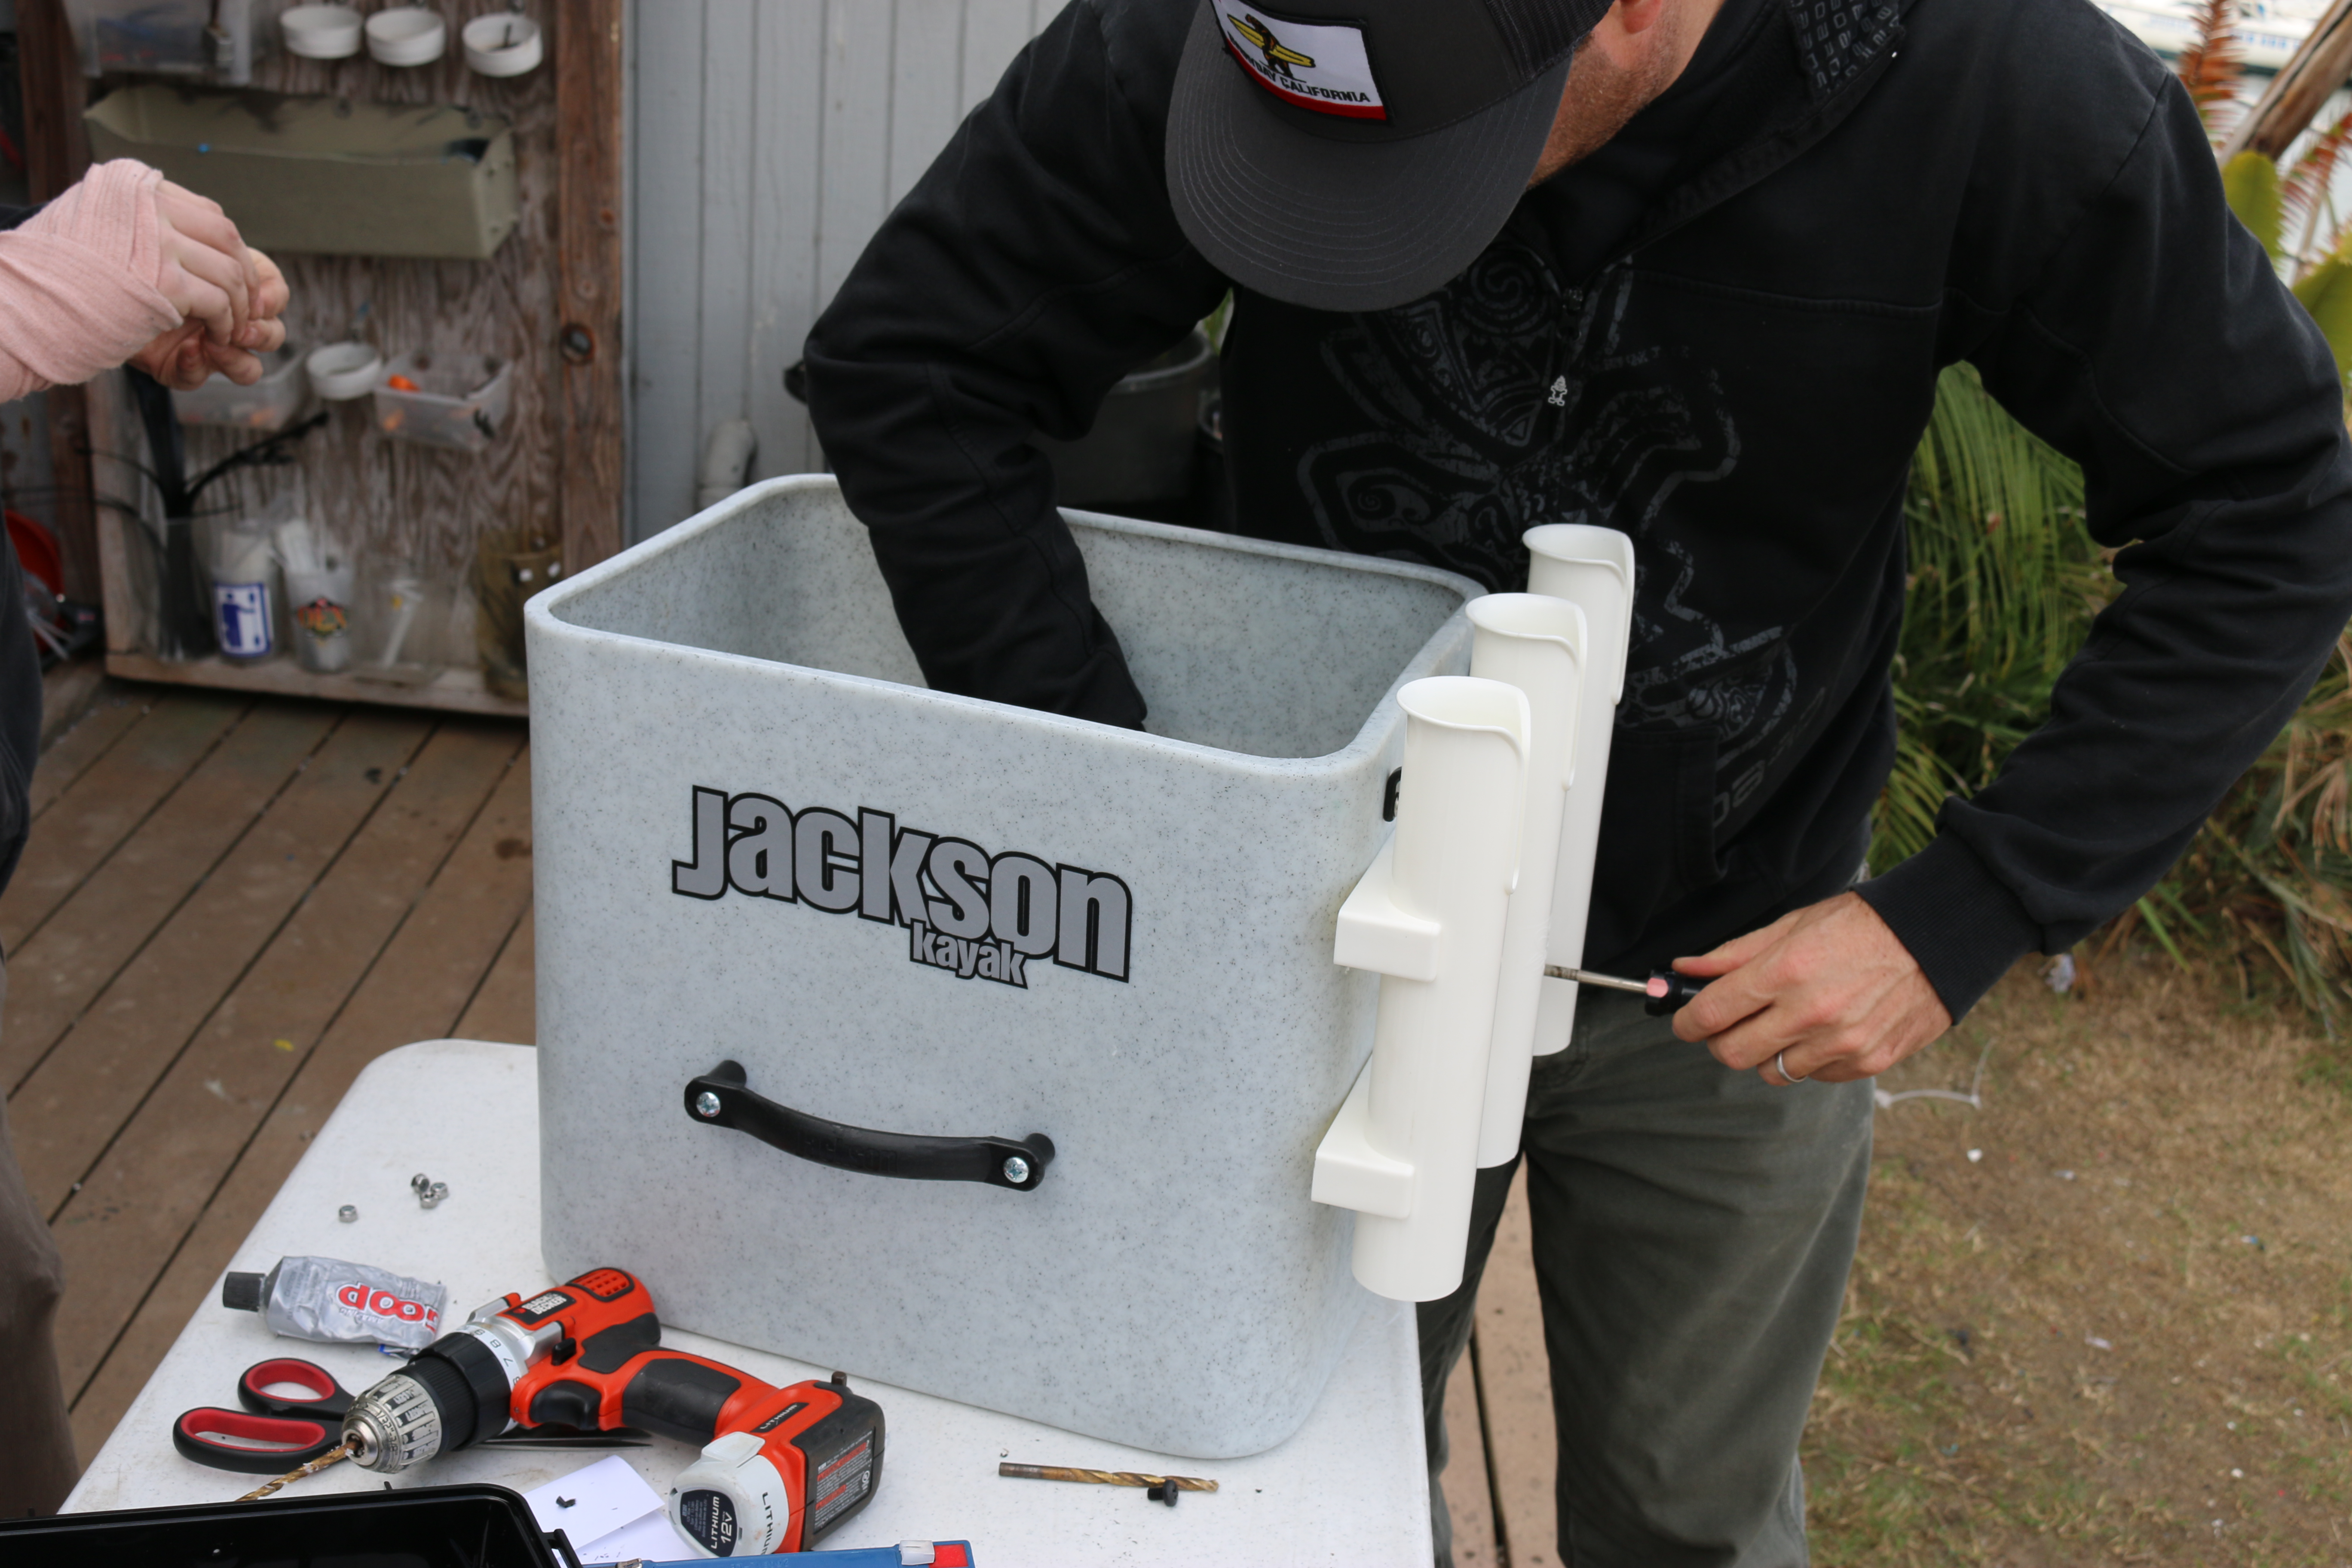 Turn a Jackson JKrate into an awesome Kayak Bait tank